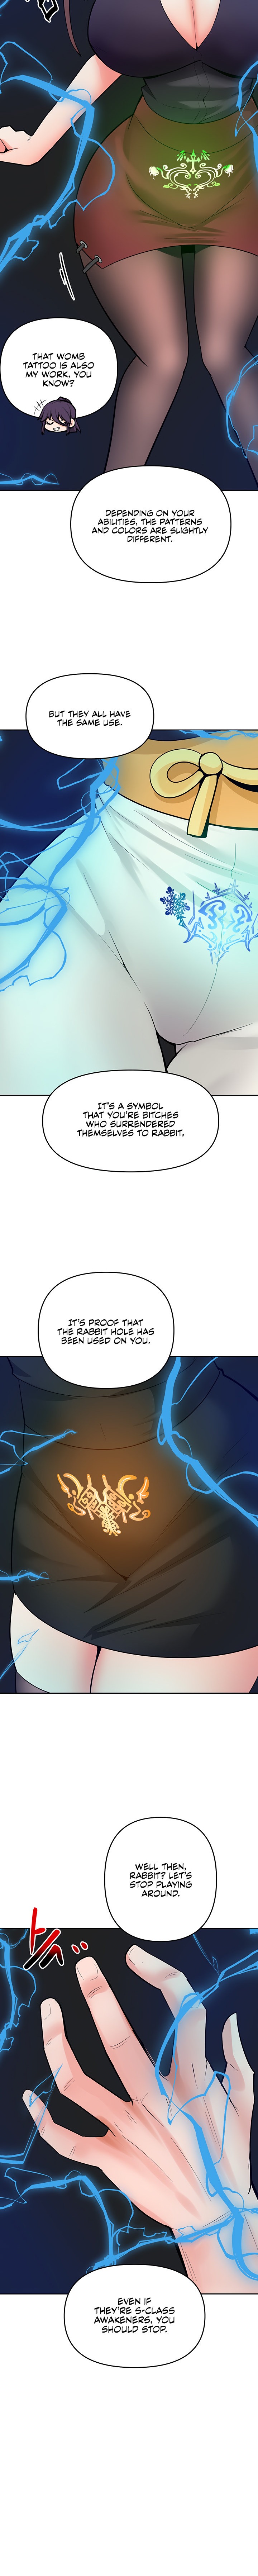 The Hypnosis App was Fake - Chapter 52 Page 18